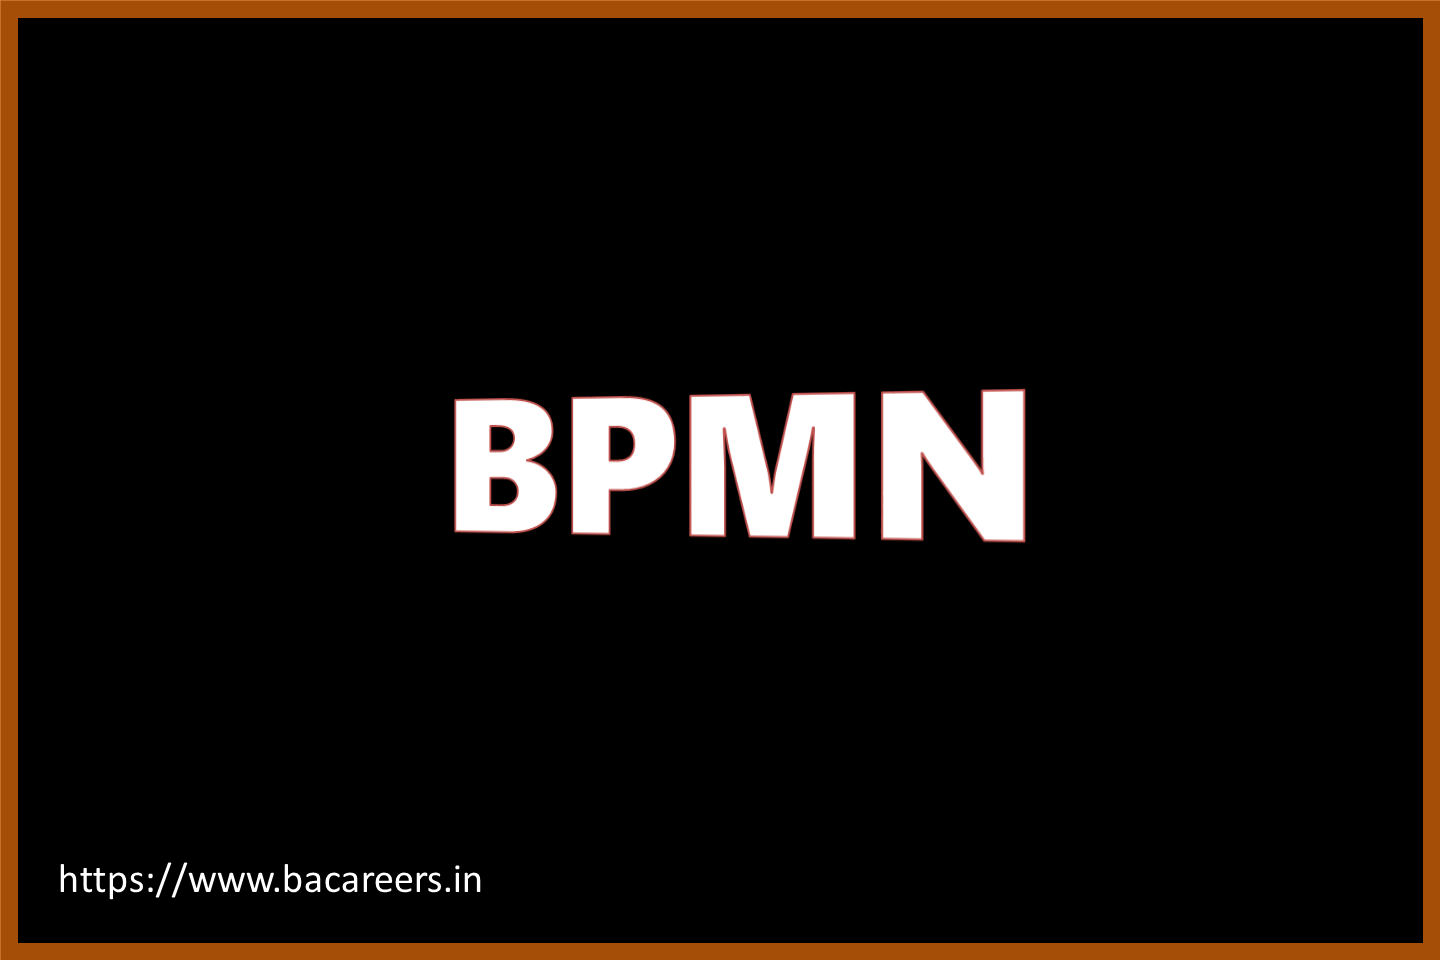 What is BPMN